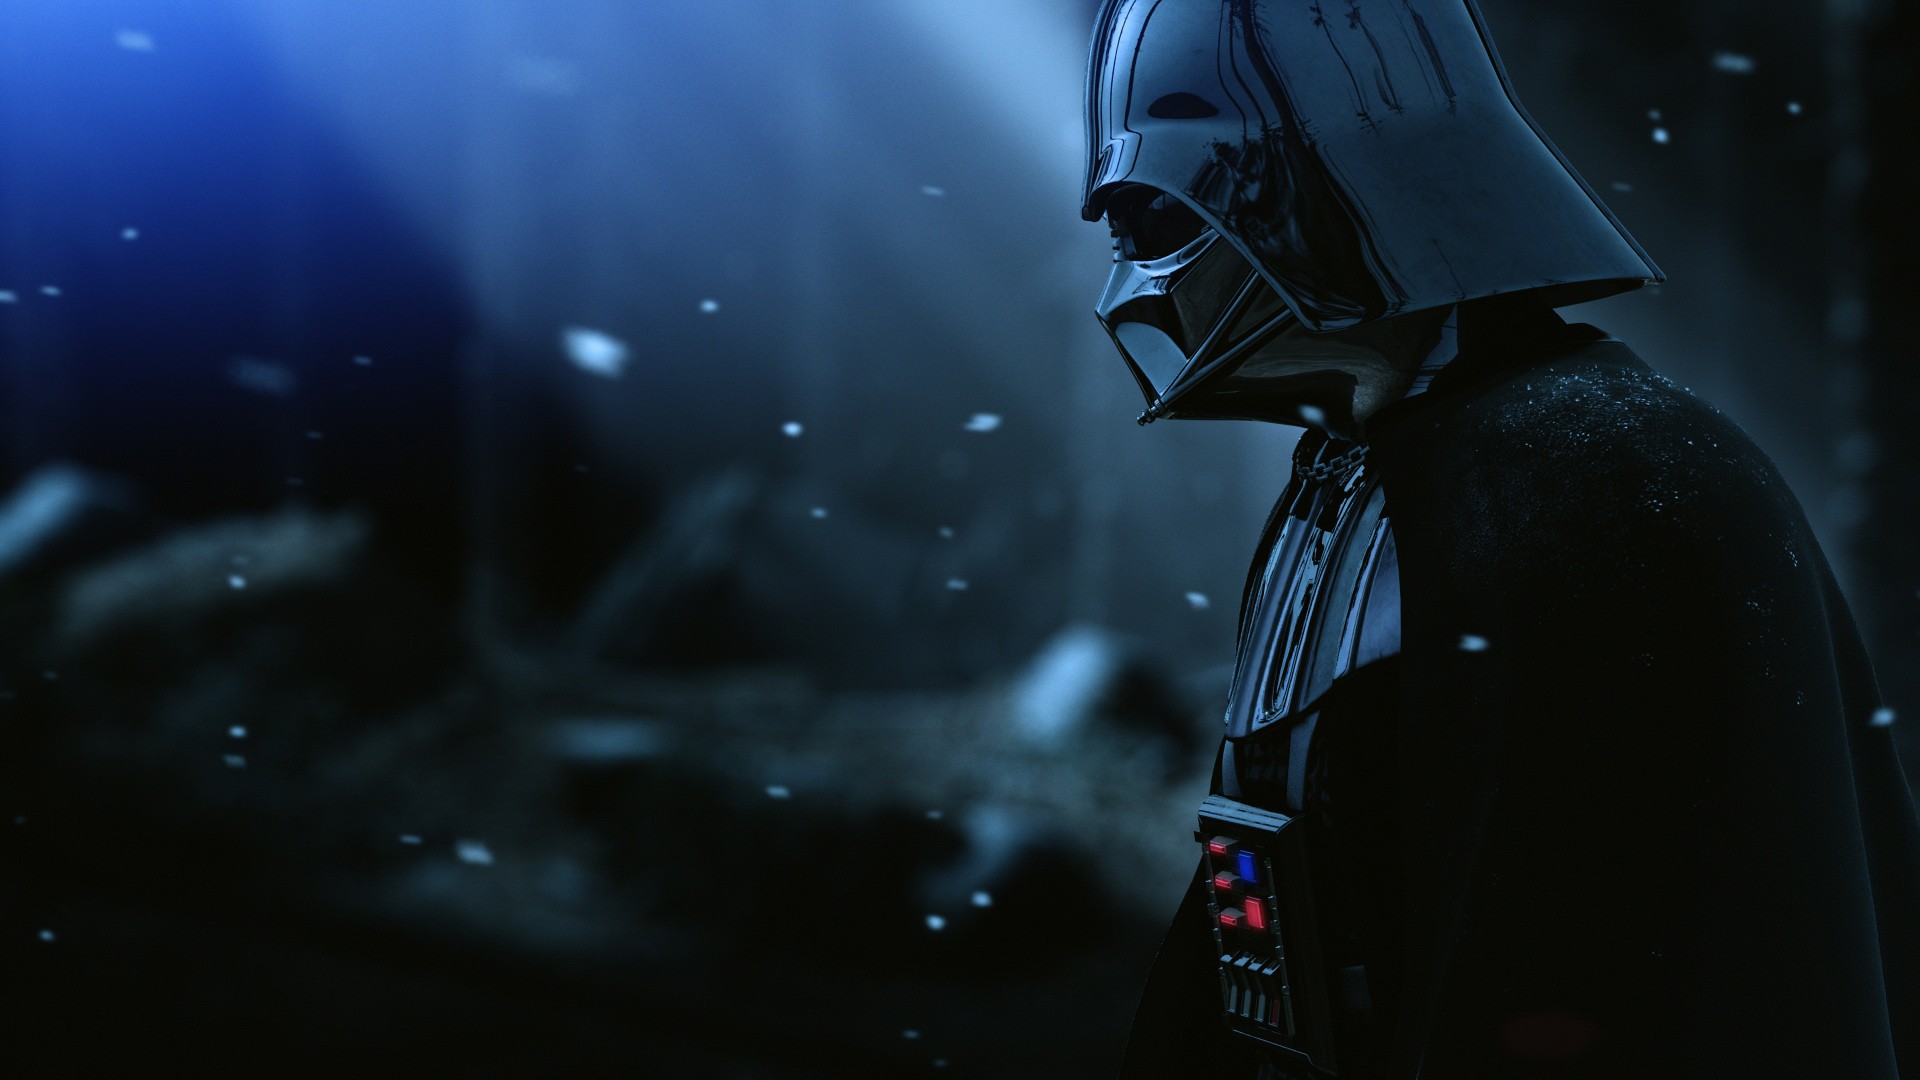 Largest Collection of Star Wars Wallpapers For Download 1920x1080